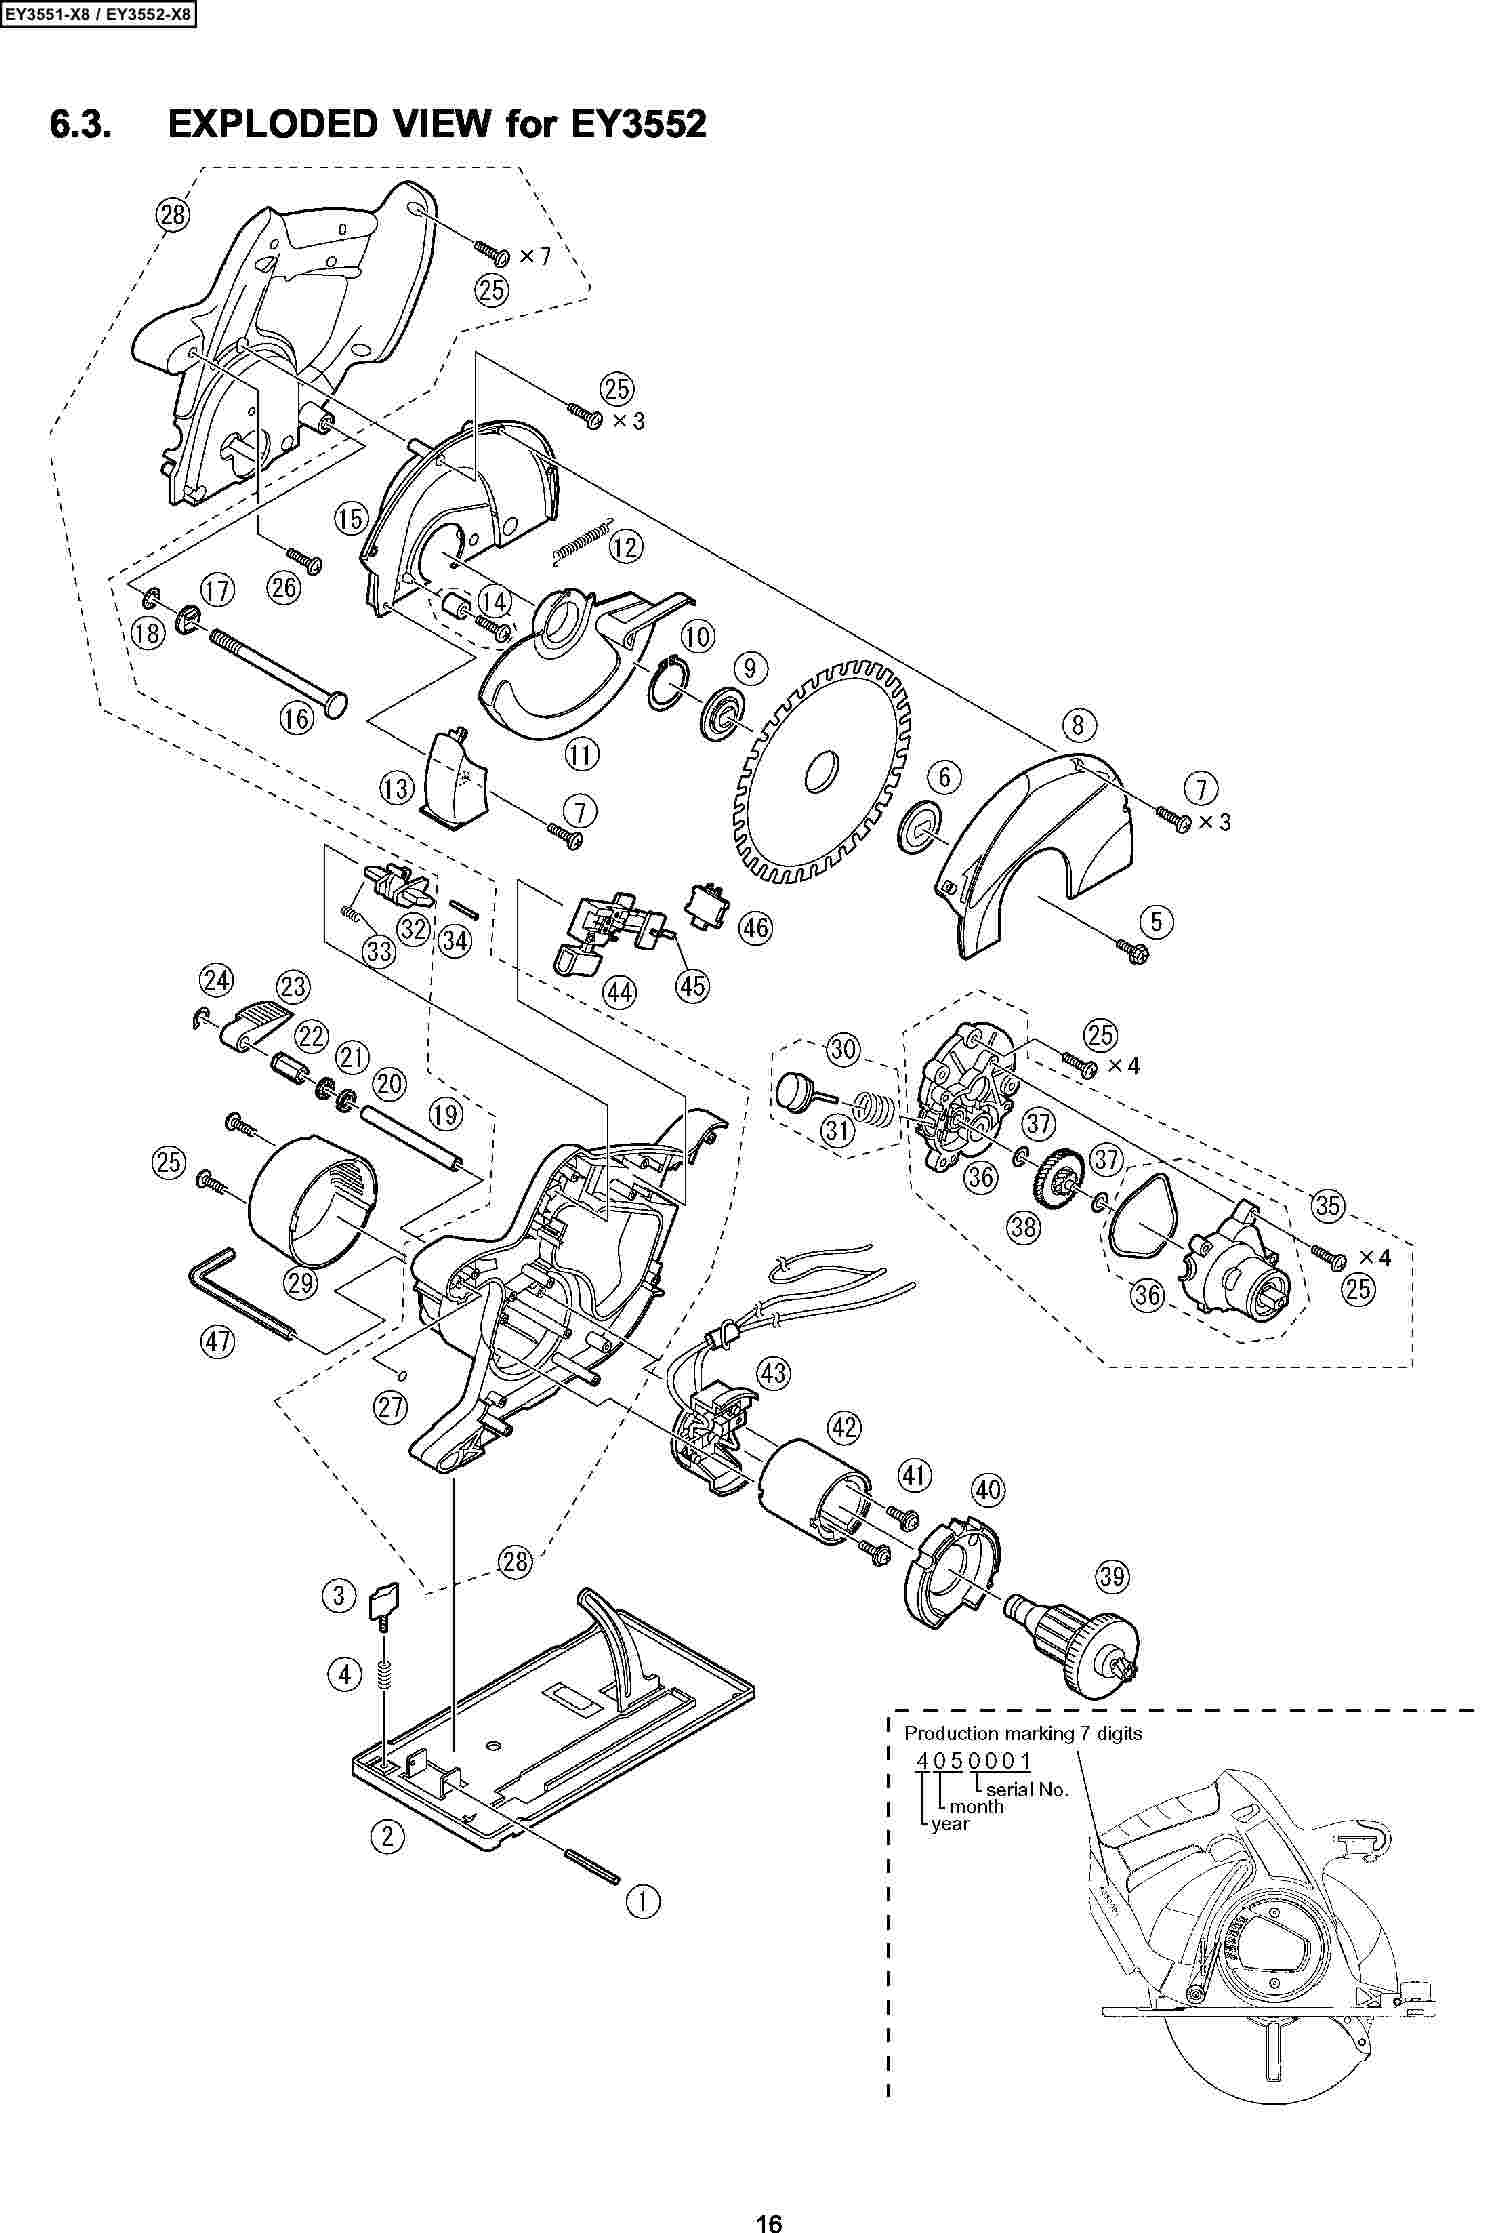 EY3552: Exploded View